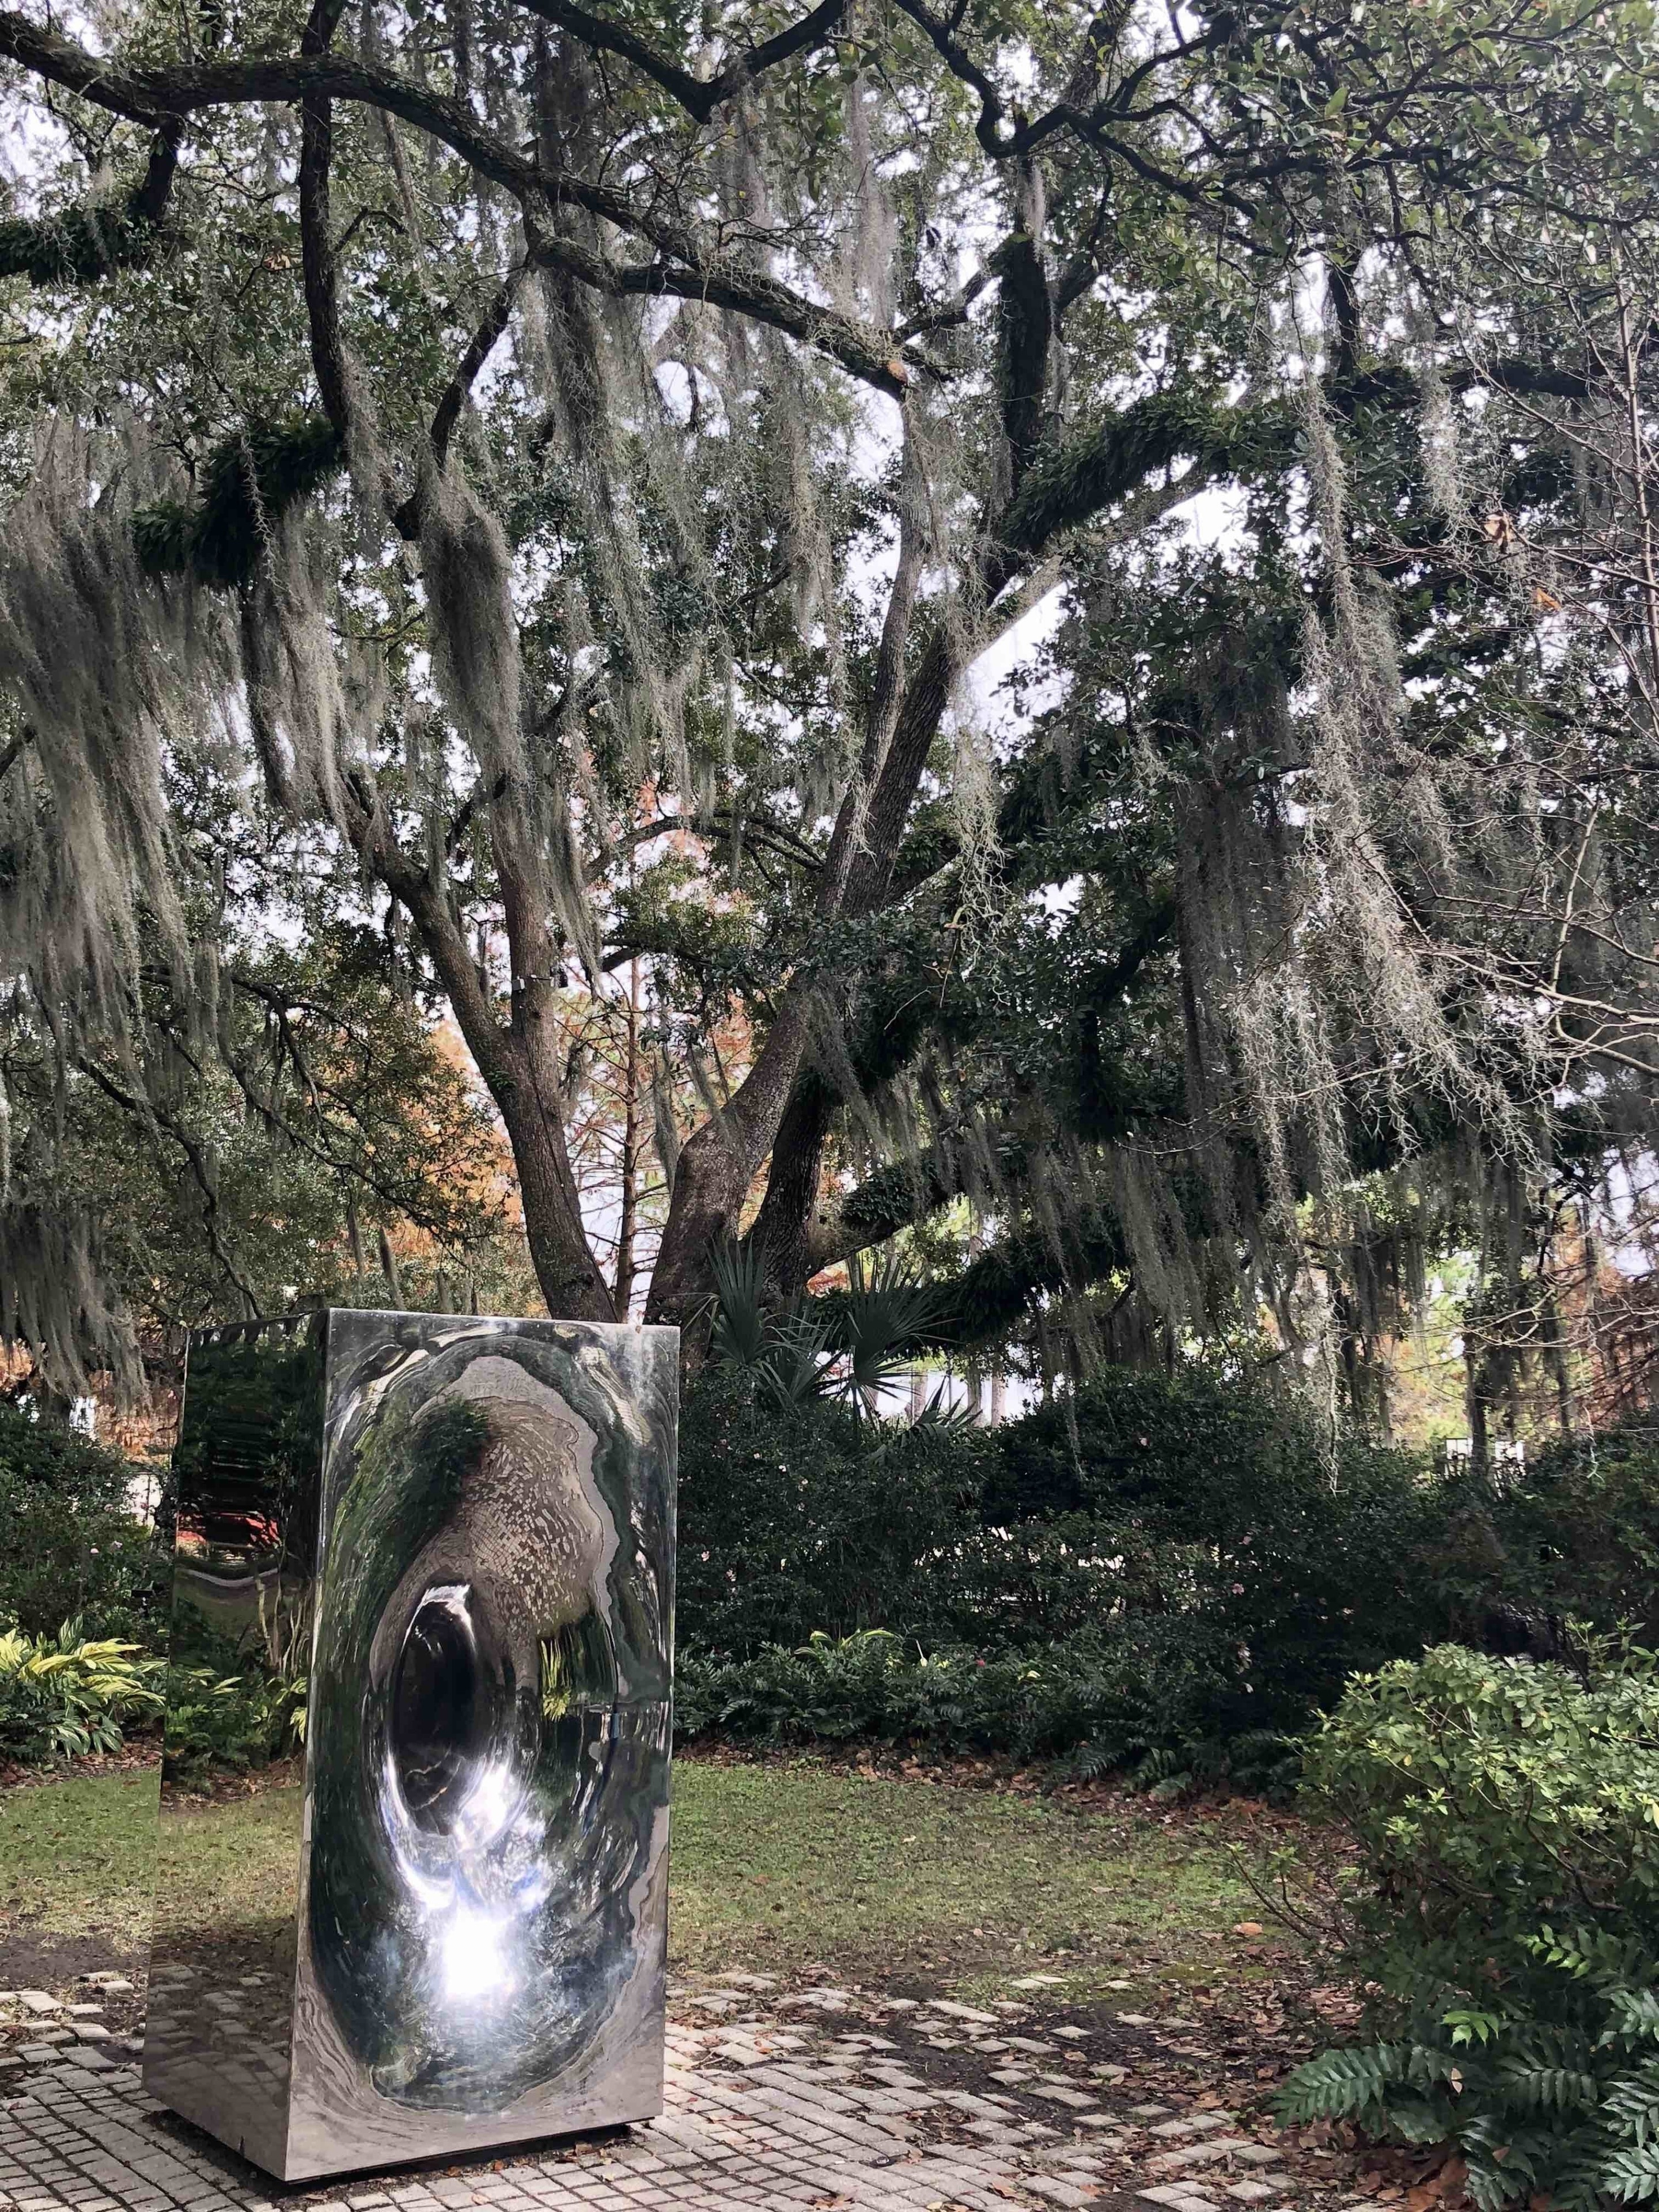 Located within New Orleans City Park this free five acre sculpture garden has some very creative pieces including this untitled stainless steel piece which dates to 1997.